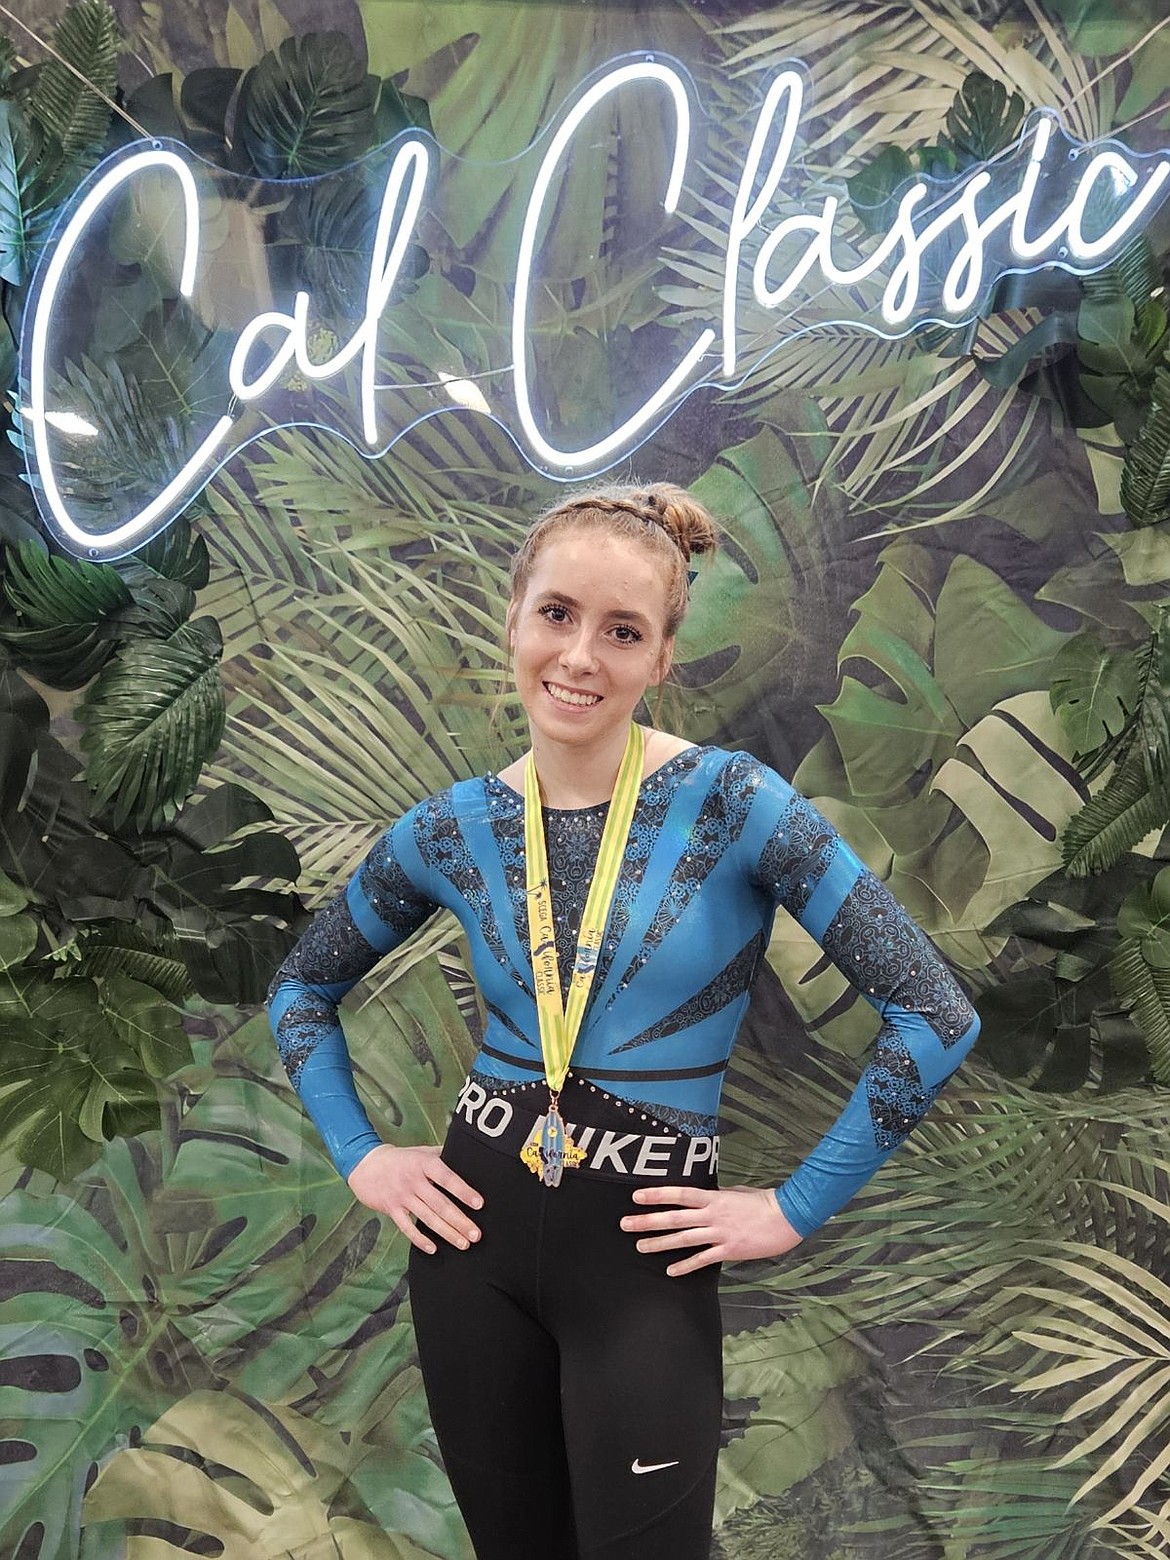 Courtesy photo
Naomi Fritts of the Technique Gymnastics Level 9 team traveled to Del Mar, Calif., to compete at the SCEGA California Classic.